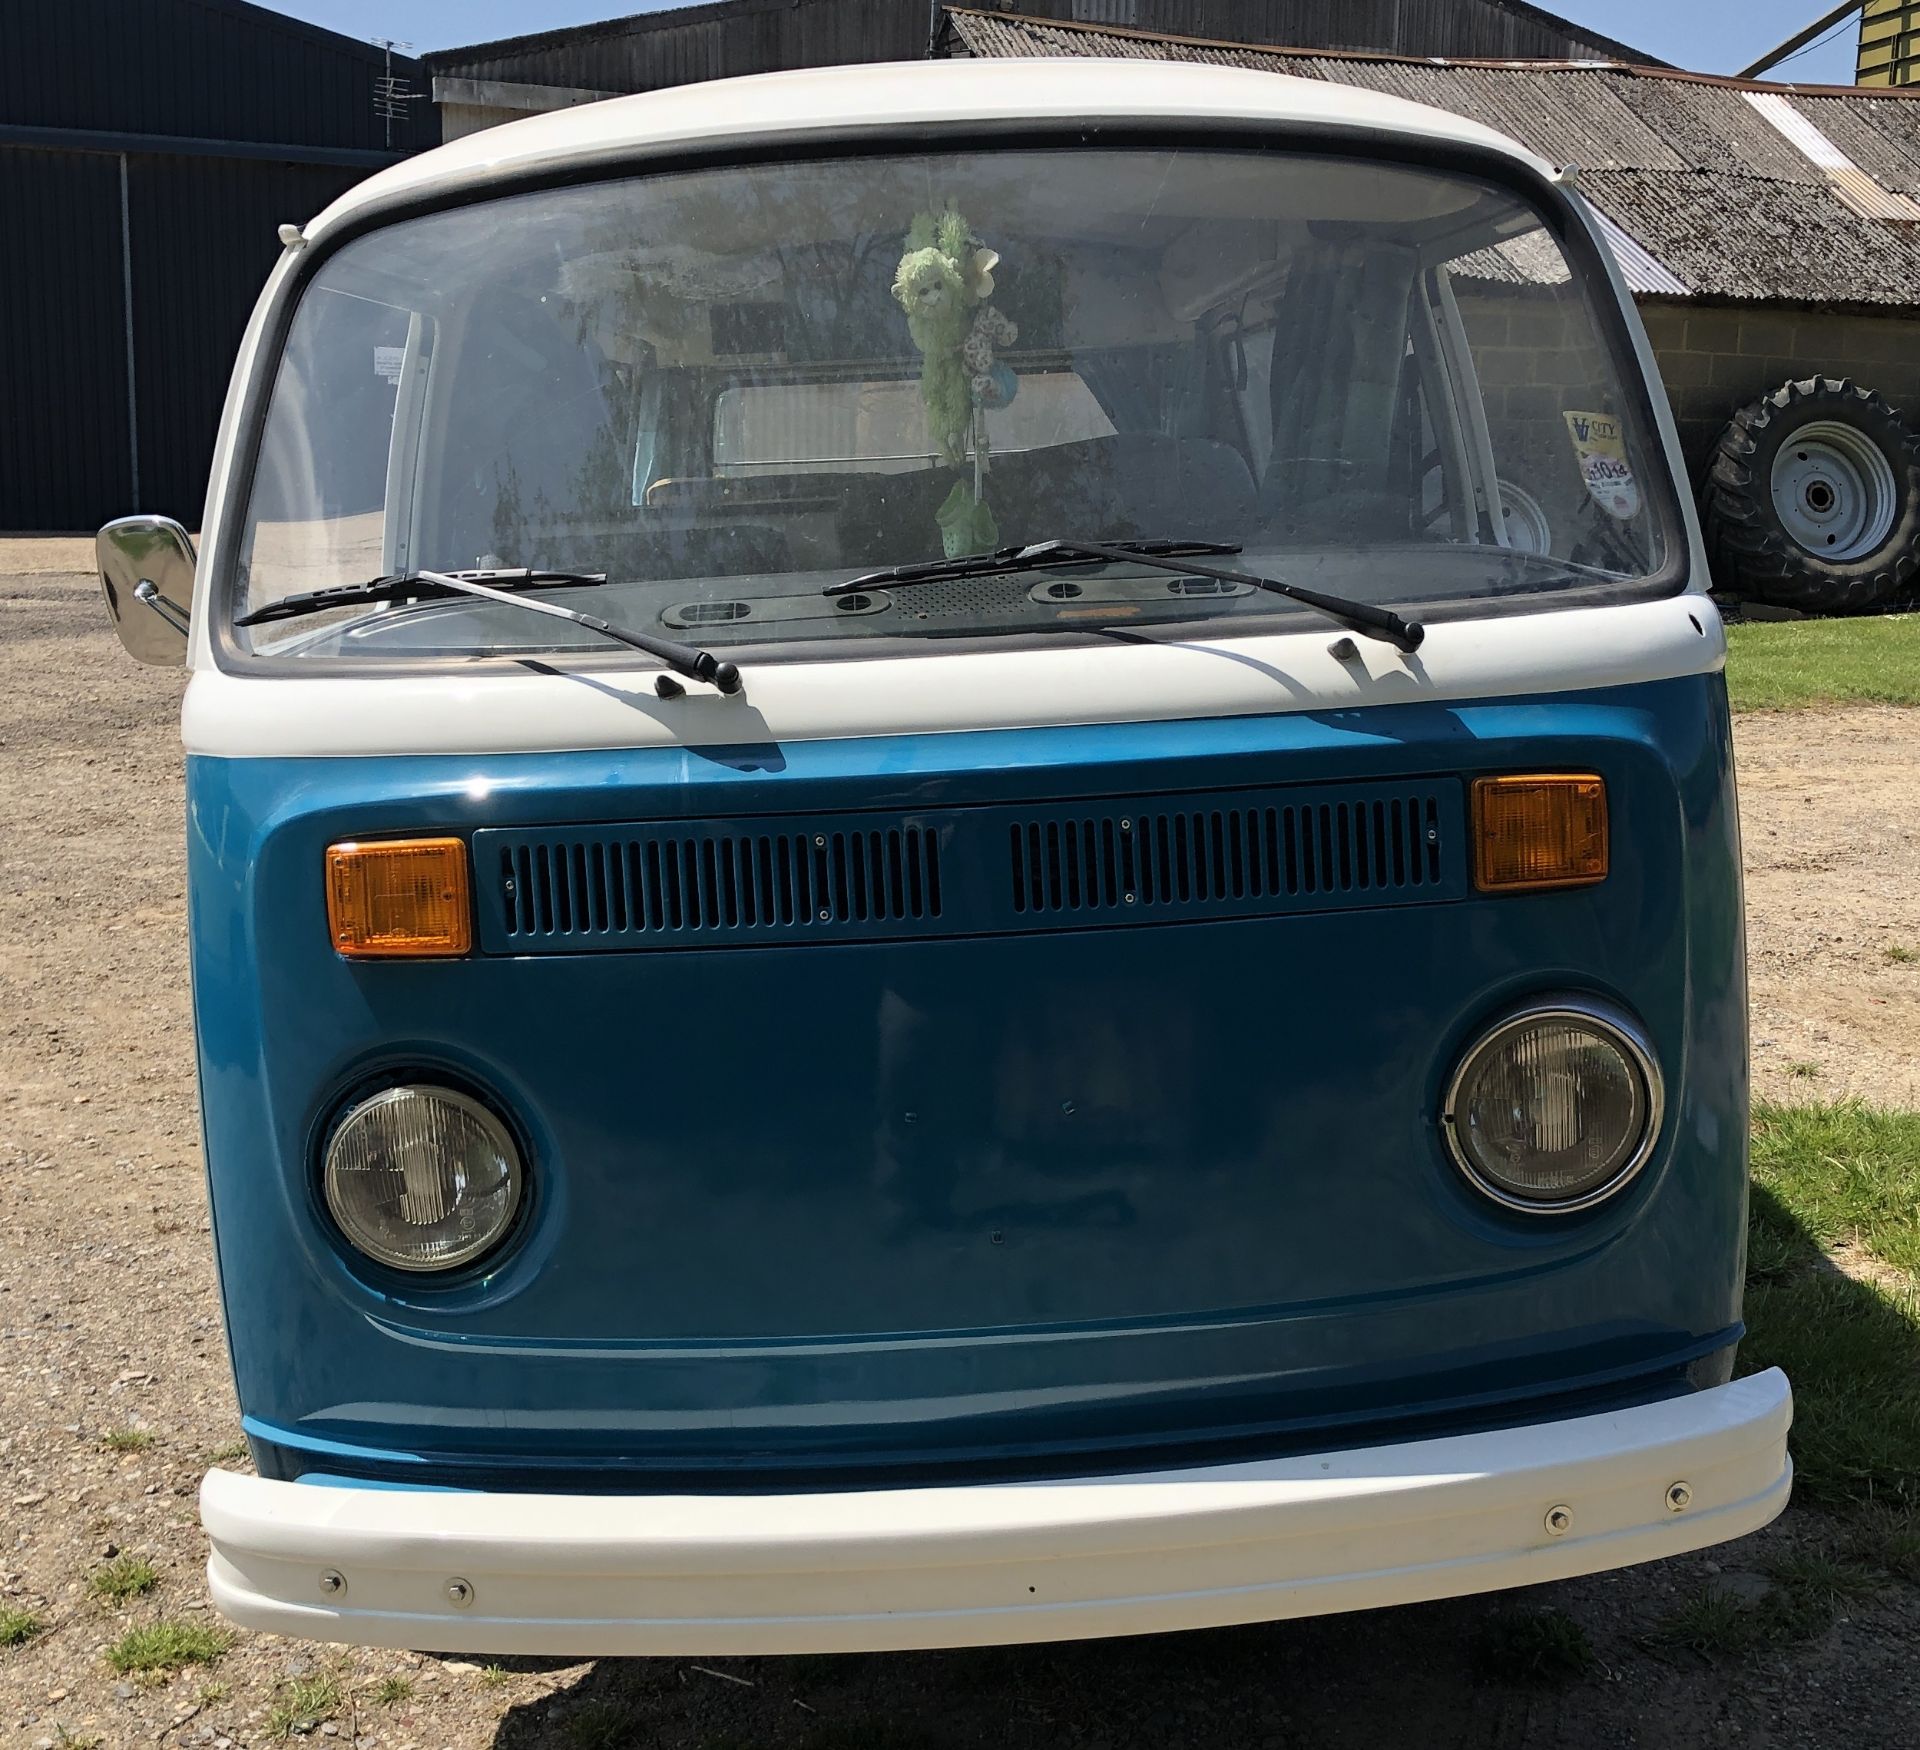 VW Microbus 8 Seater Caravanette Devon, Petrol, Registration UMH 420S, First Registered 14th March - Image 3 of 47